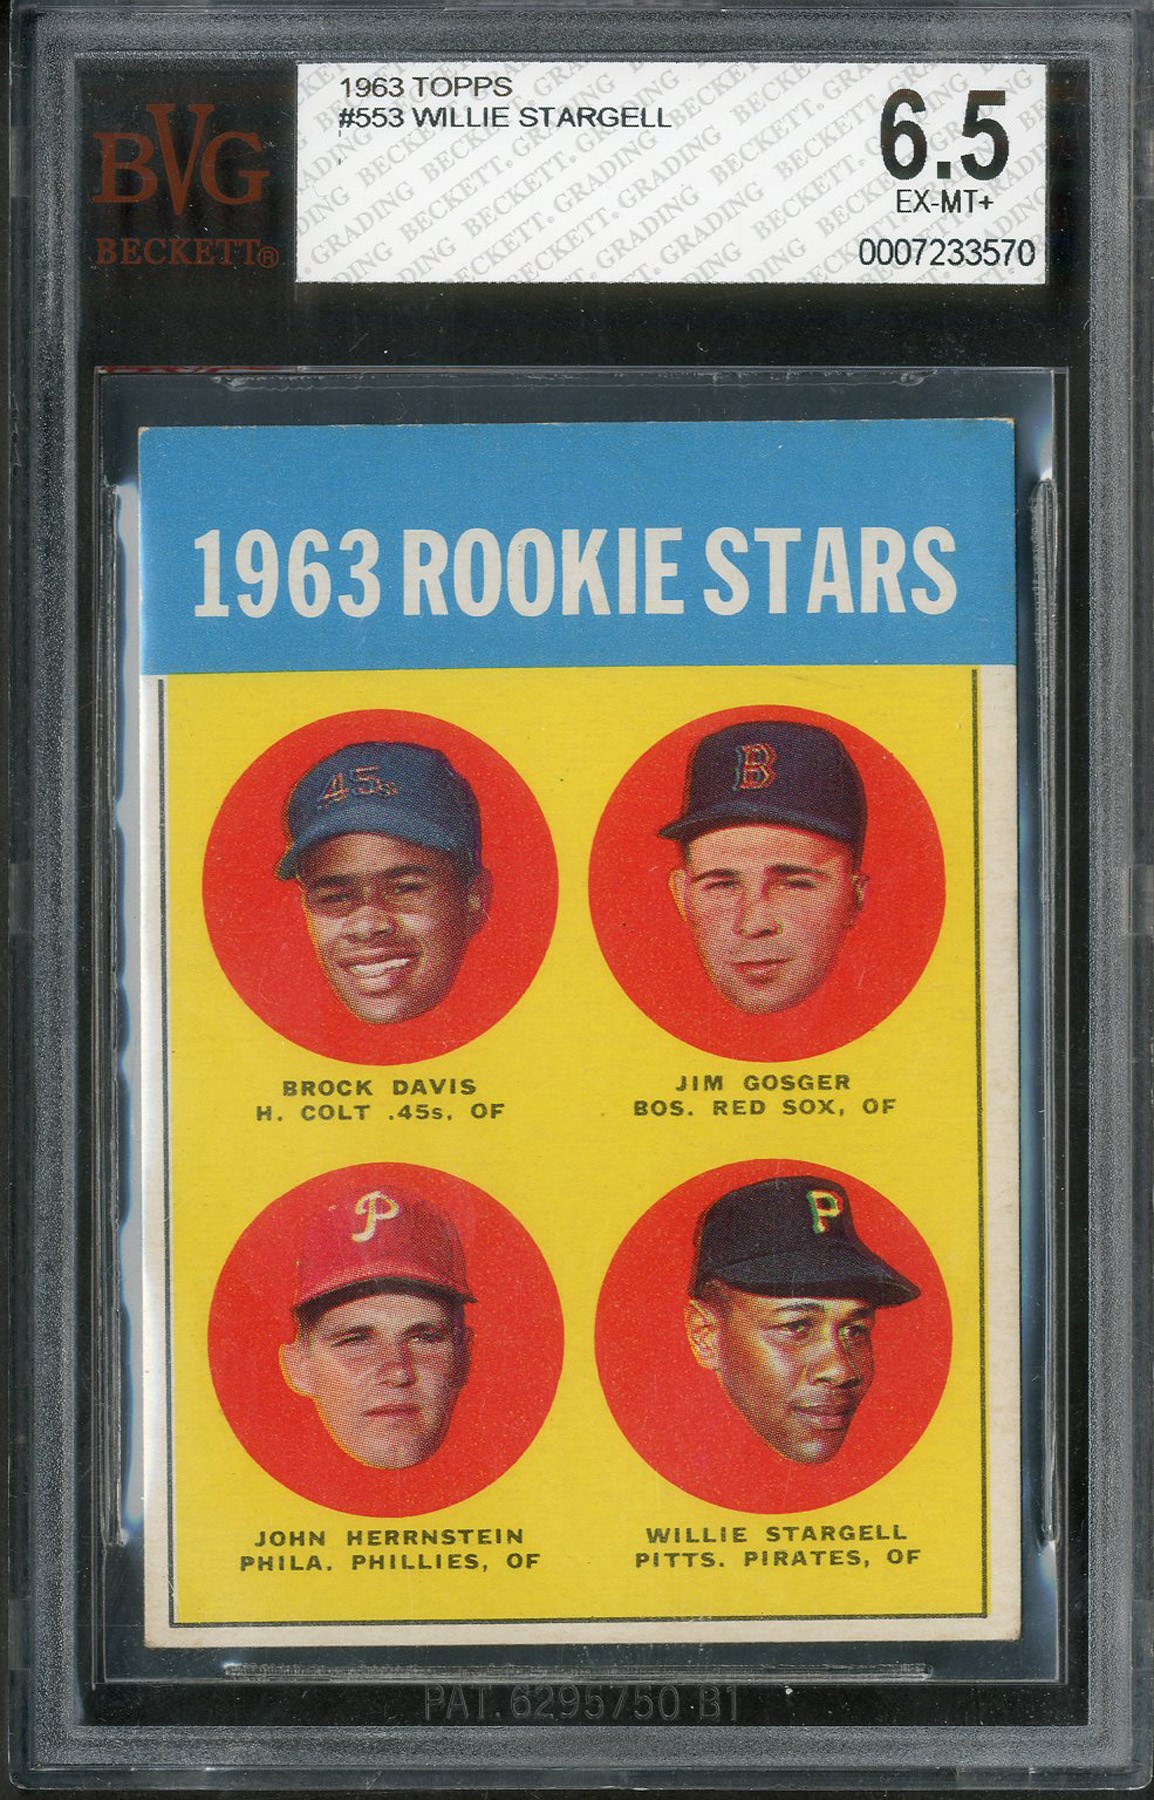 Baseball and Trading Cards - 1963 Topps #553 Willie Stargell Rookie - BVG EX-MT+ 6.5